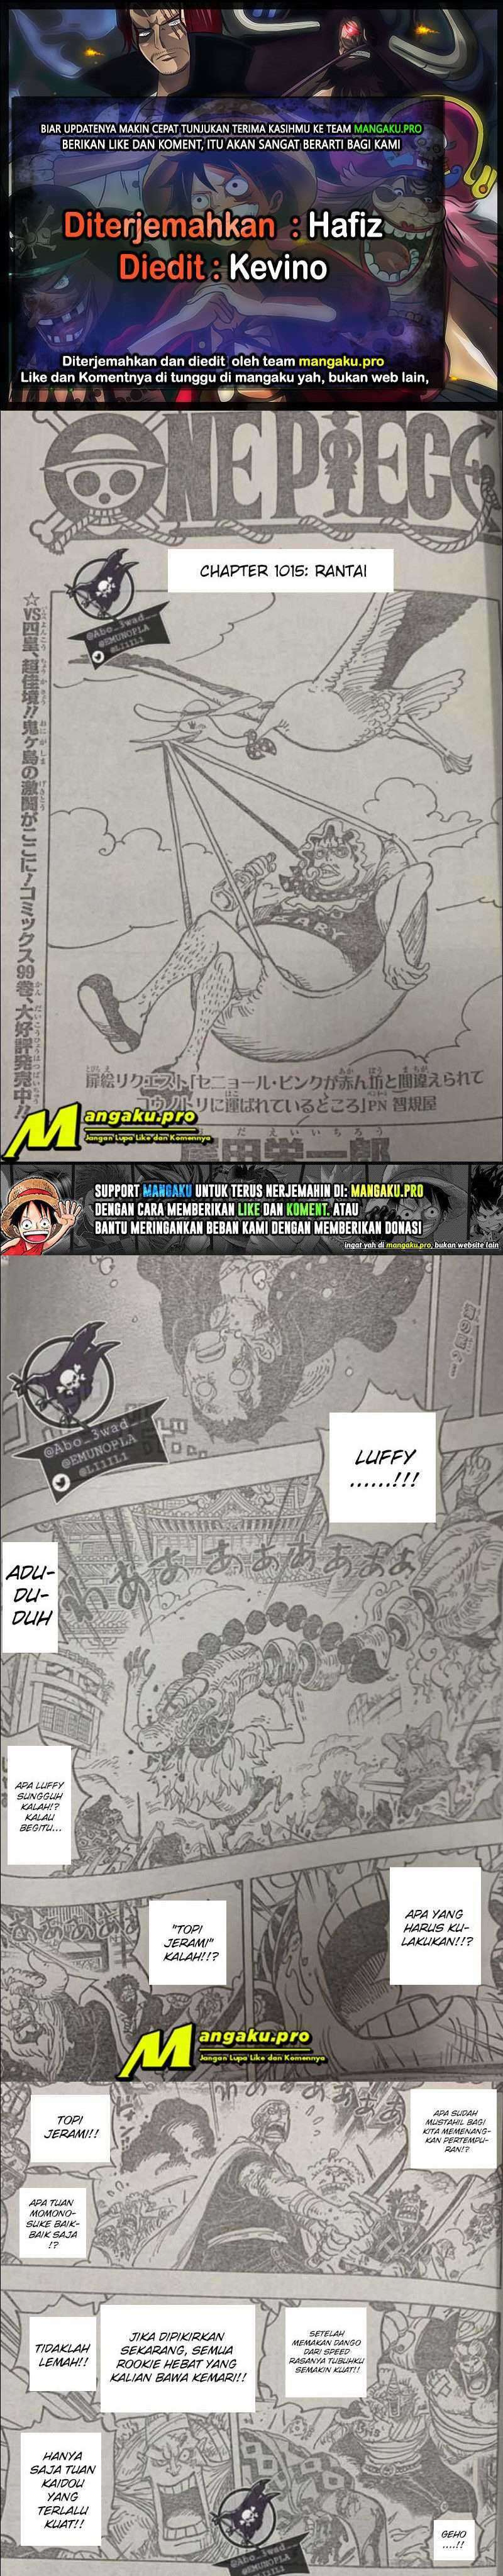 One Piece Chapter 1015 lq